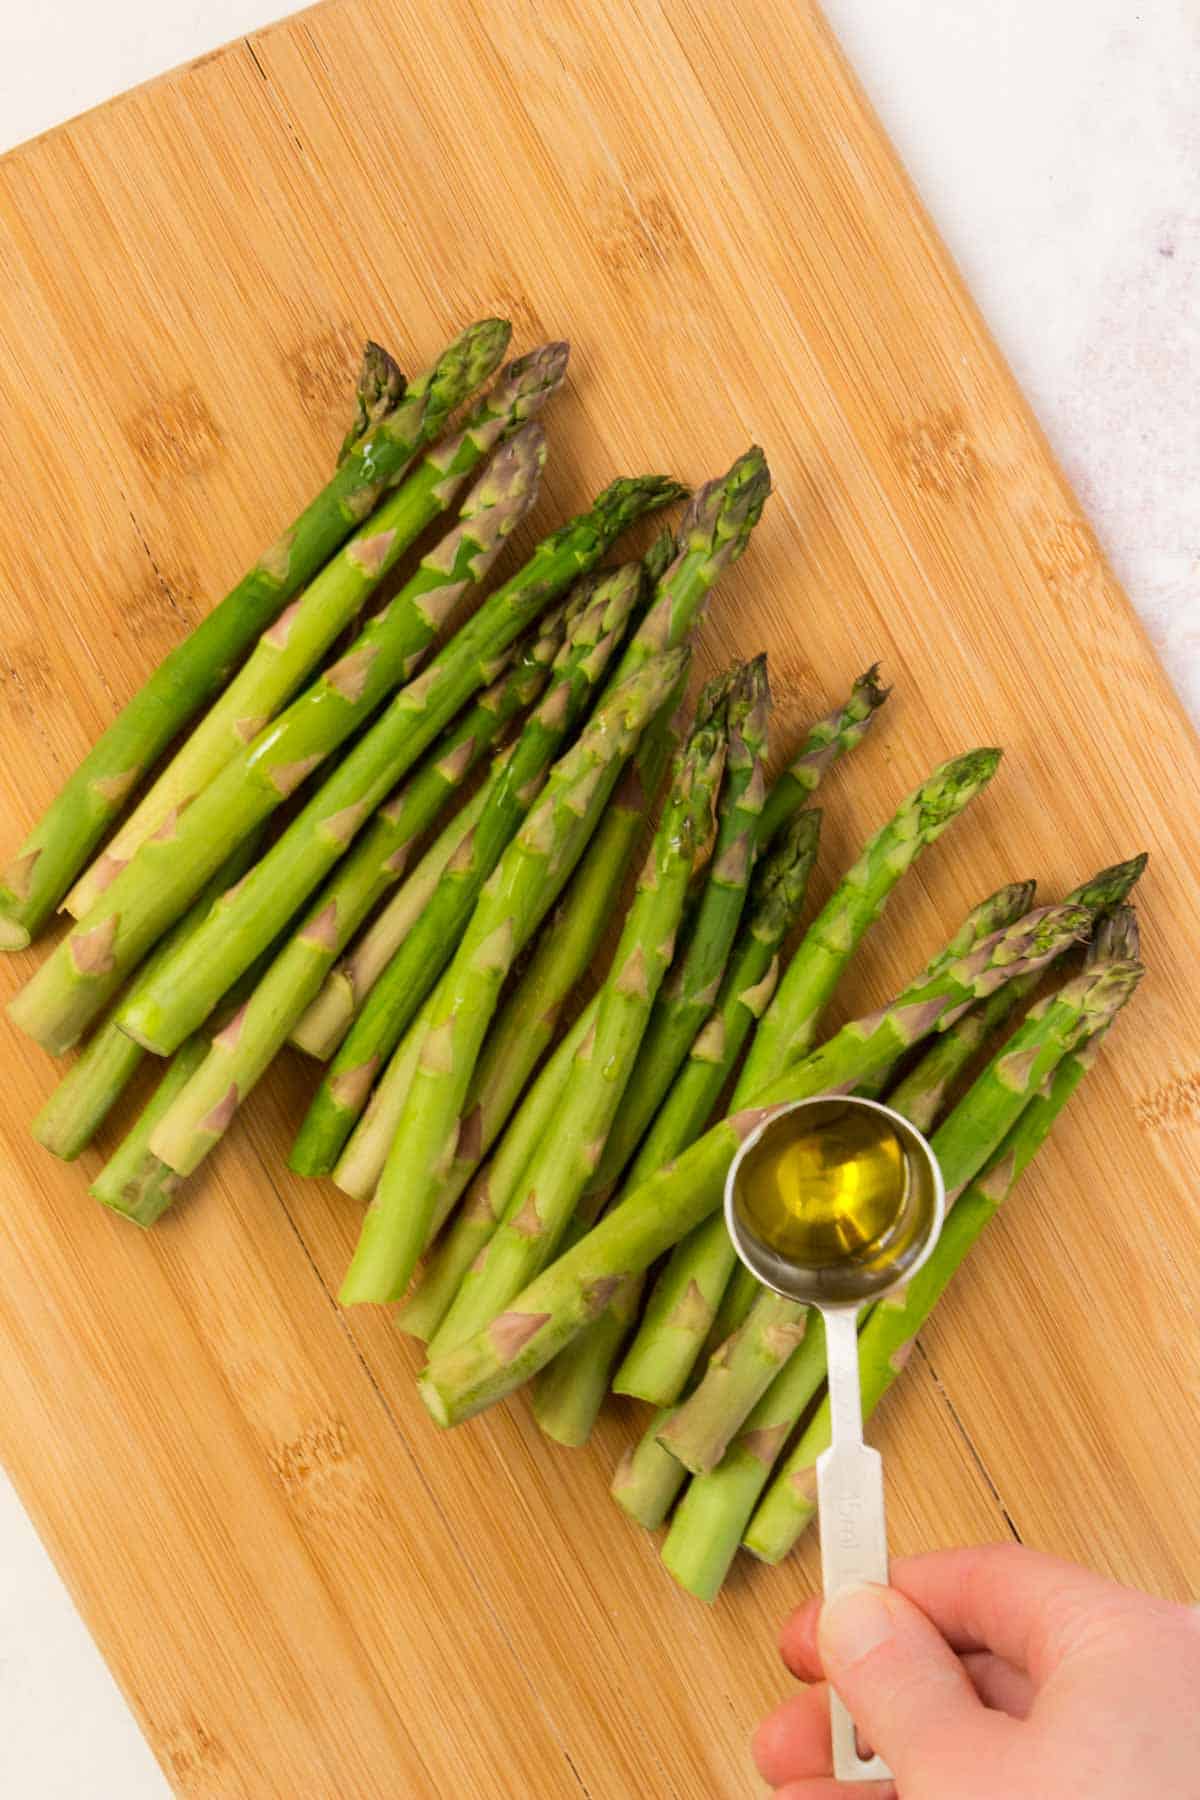 Drizzling olive oil out of a measuring spoon over asparagus spears on a cutting board.